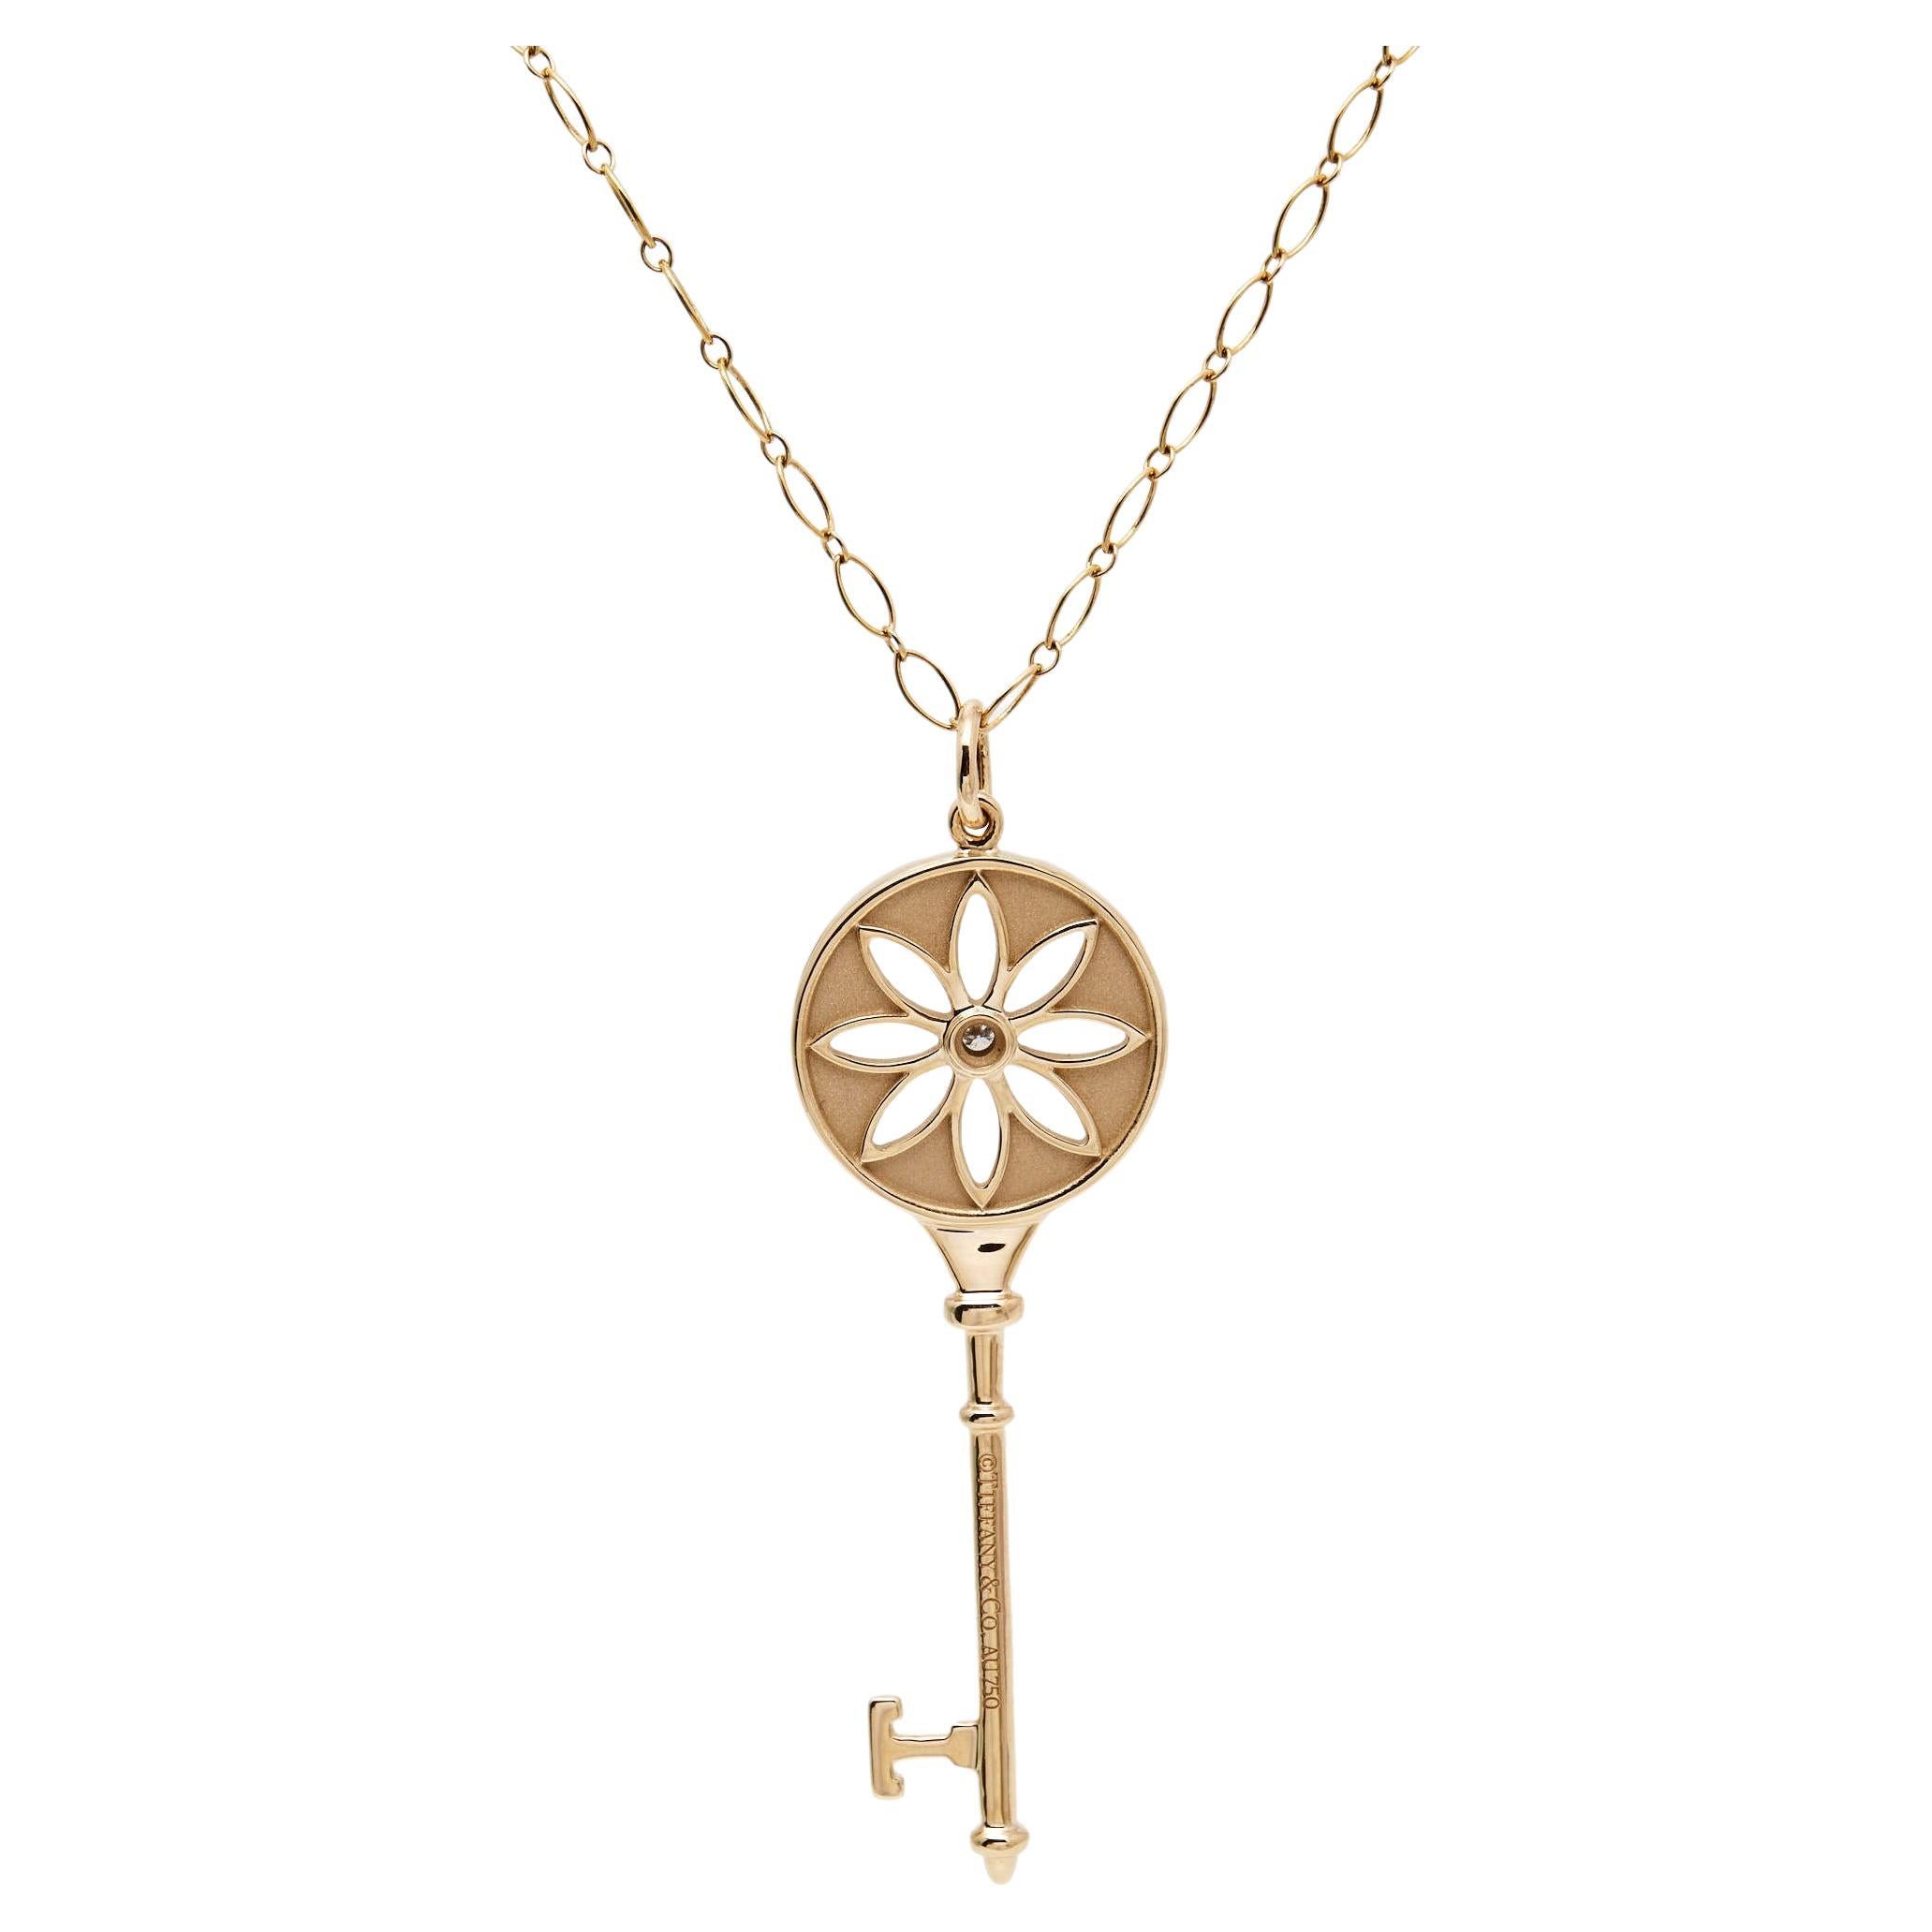 What does wearing a key on a necklace mean?